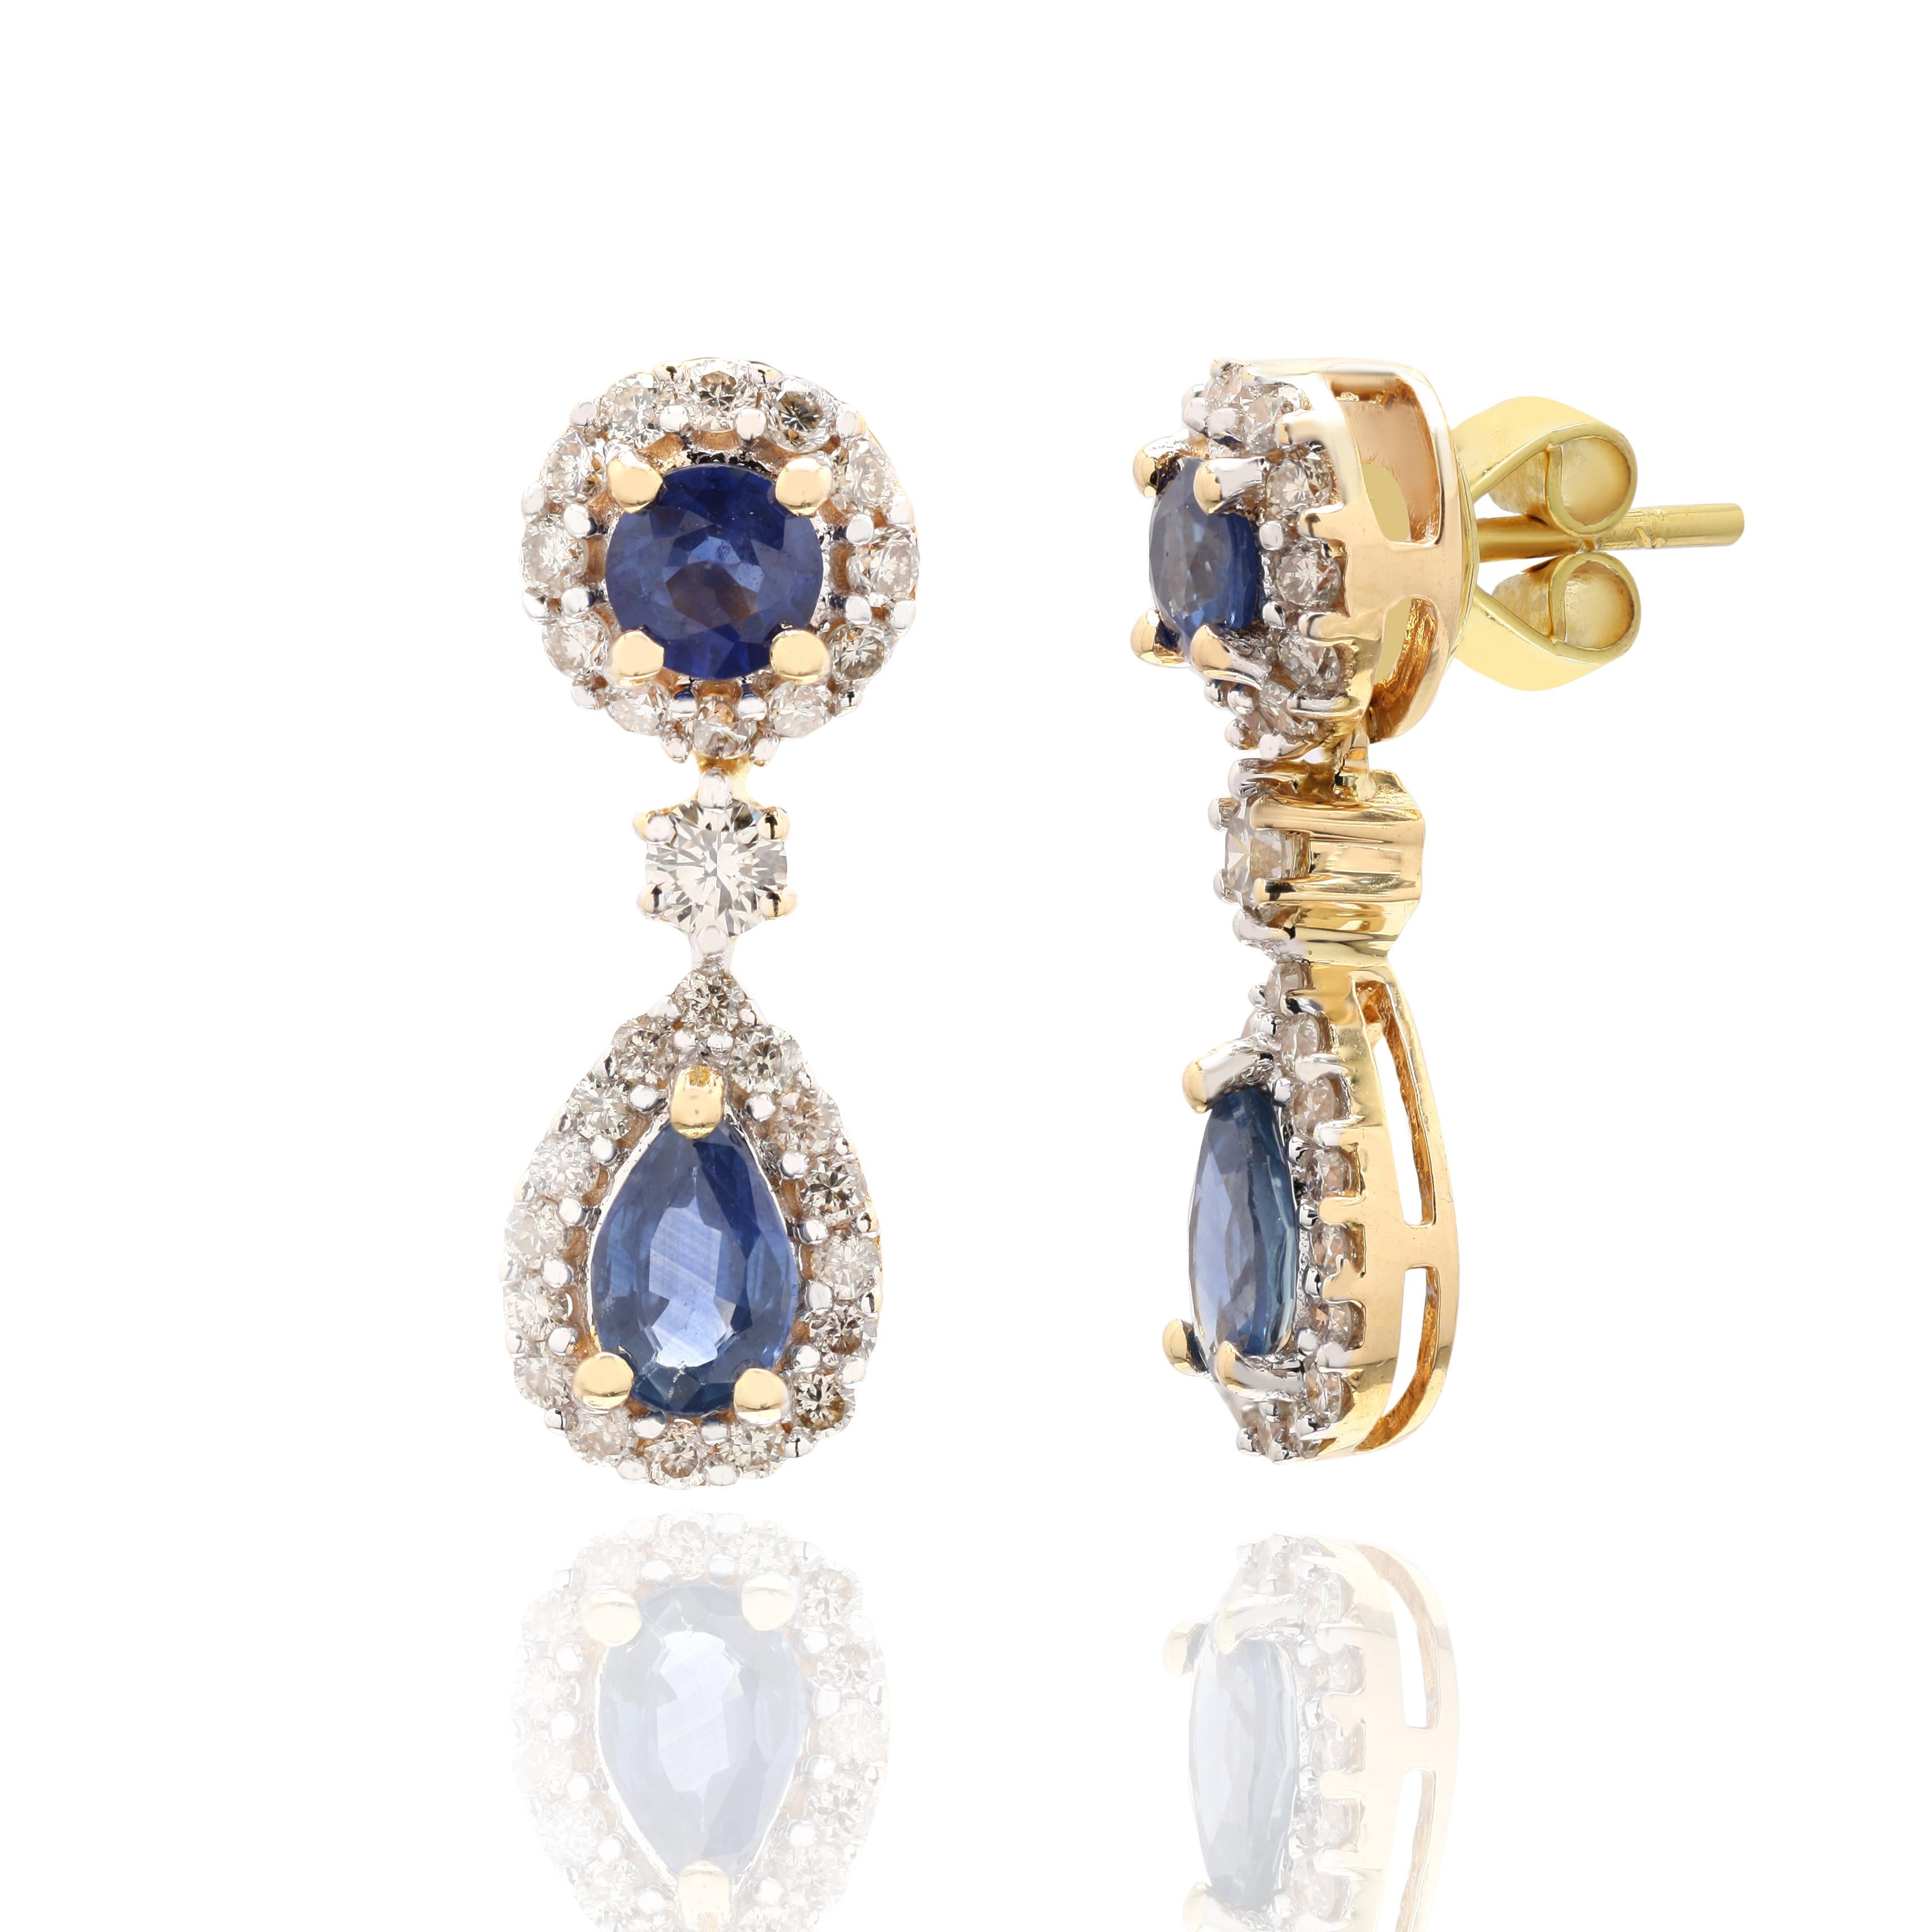 Diamond Blue Sapphire Dangle Earrings in 18K Gold to make a statement with your look. These earrings create a sparkling, luxurious look featuring round and oval cut gemstone.
Sapphire stimulates concentration and reduces stress. 
Designed with